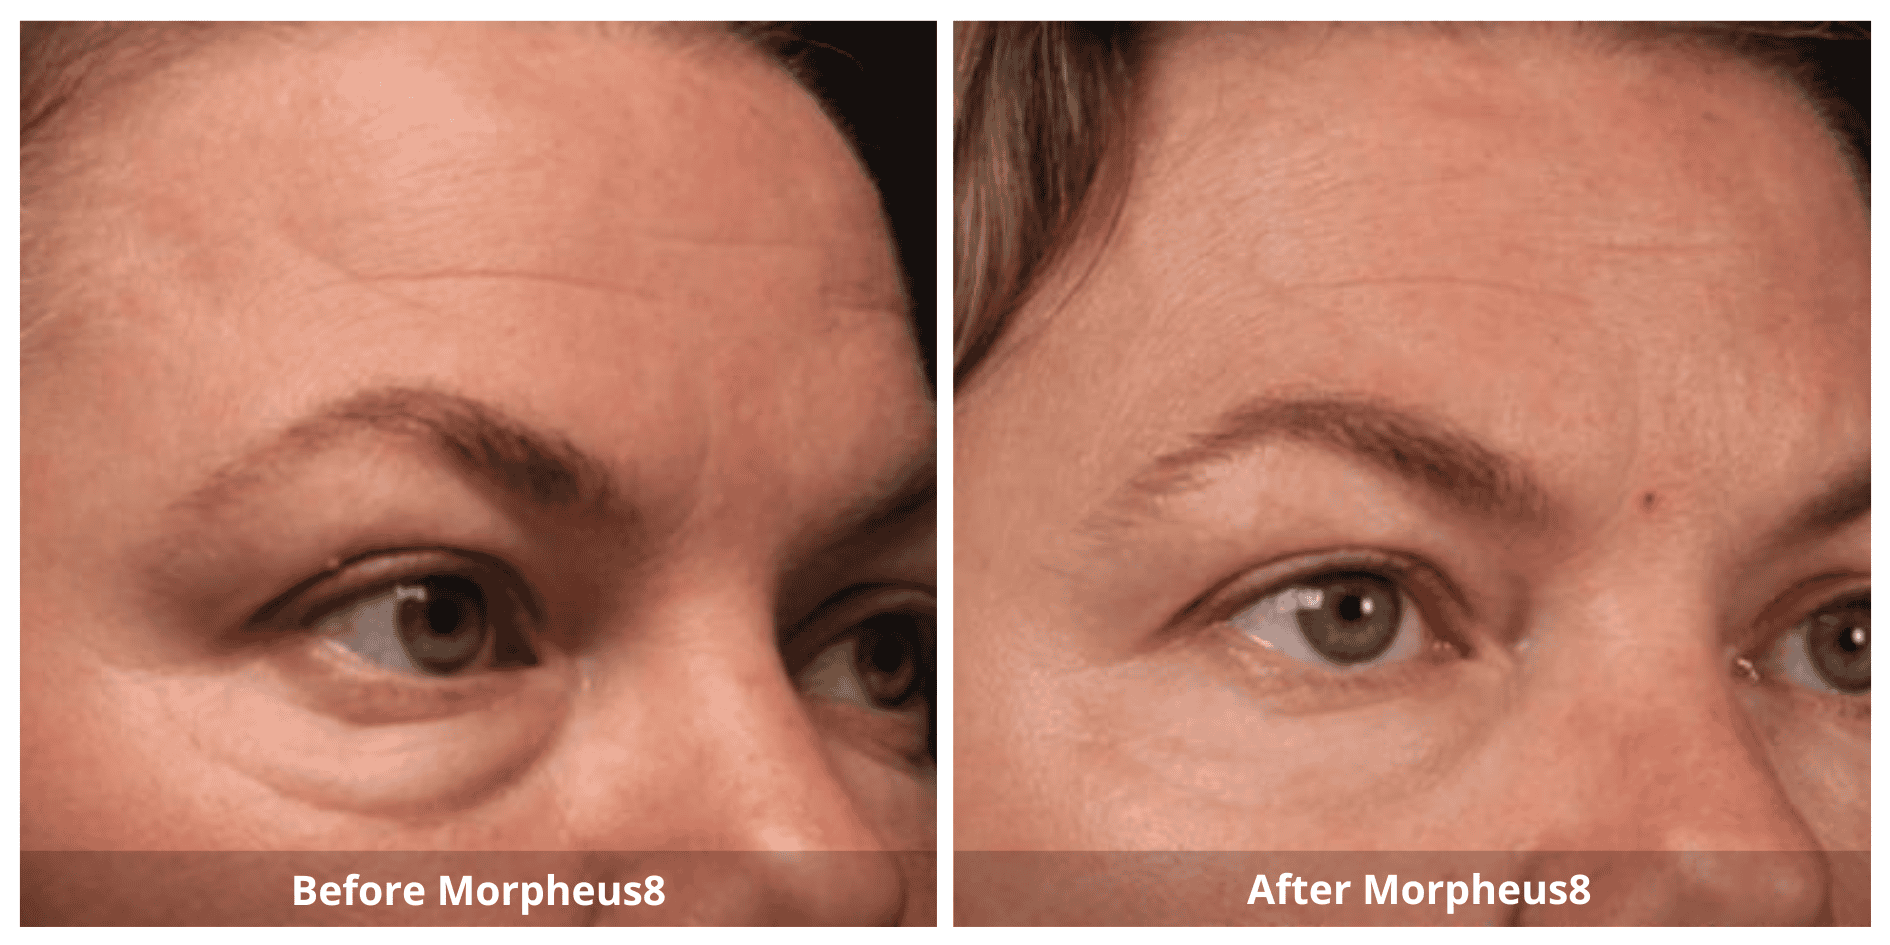 Morpheus8 Under Eyes Treatment Before and After photo